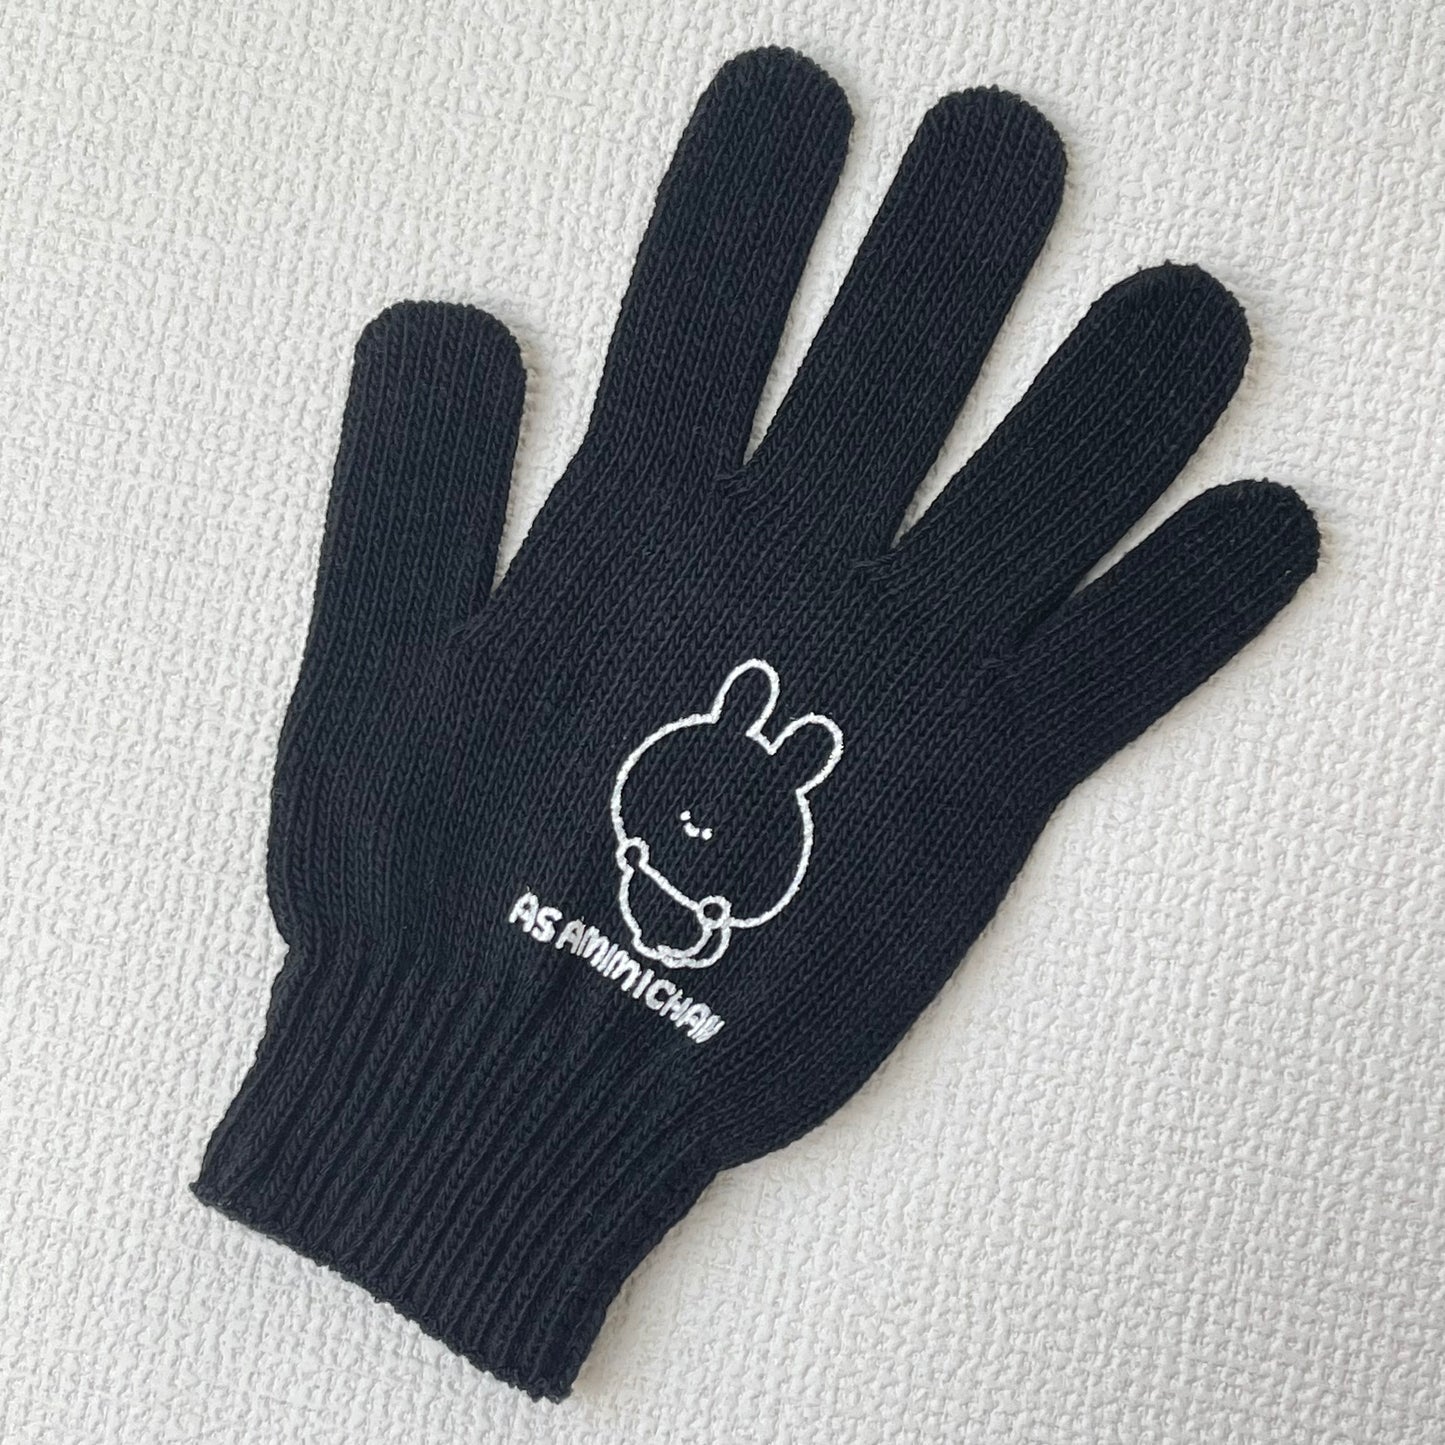 [Asamimi-chan] Work gloves (protect you! Series) [Shipped in mid-March]